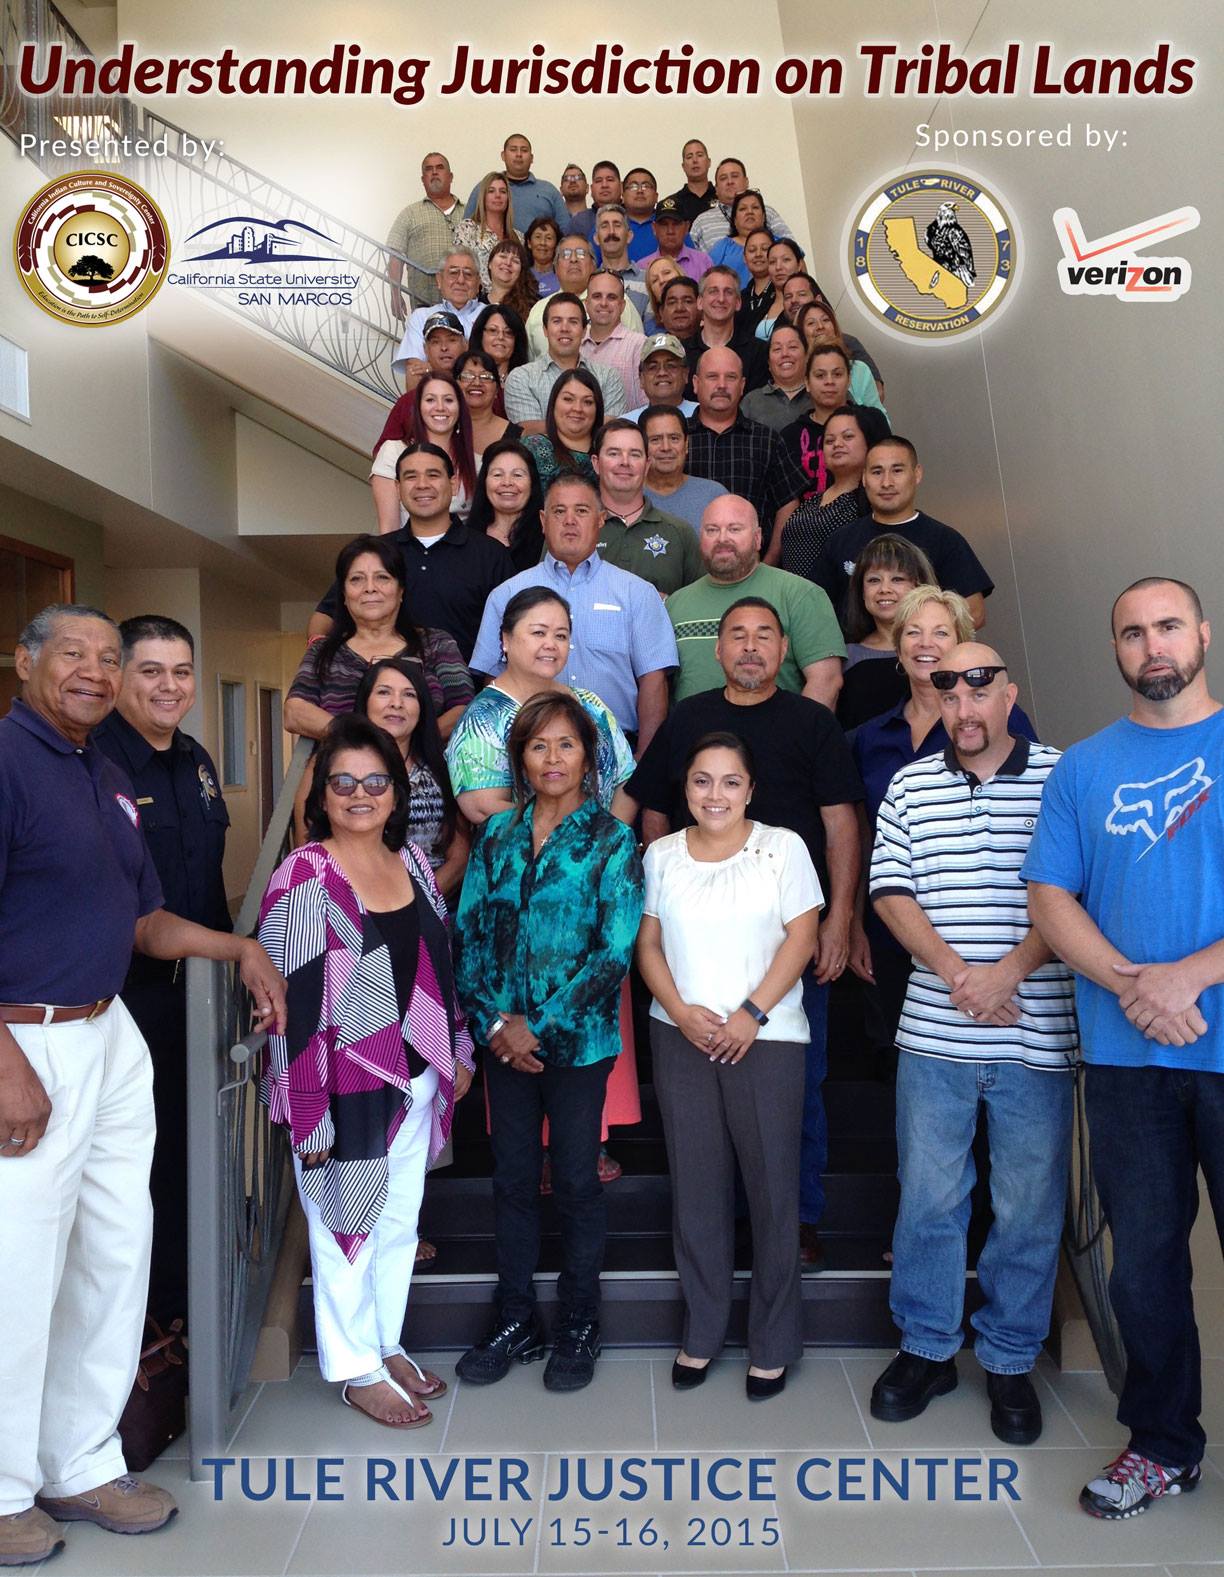 Program participants gathered in front of and up a staircase with the following information on the poster: Understanding Jurisdiction on Tribal Lands, Tule River Justice Center, July 15-16, 2015, Presented by: CICSC and California State University San Marcos, Sponsored by: Tule River Reservation and Verizon